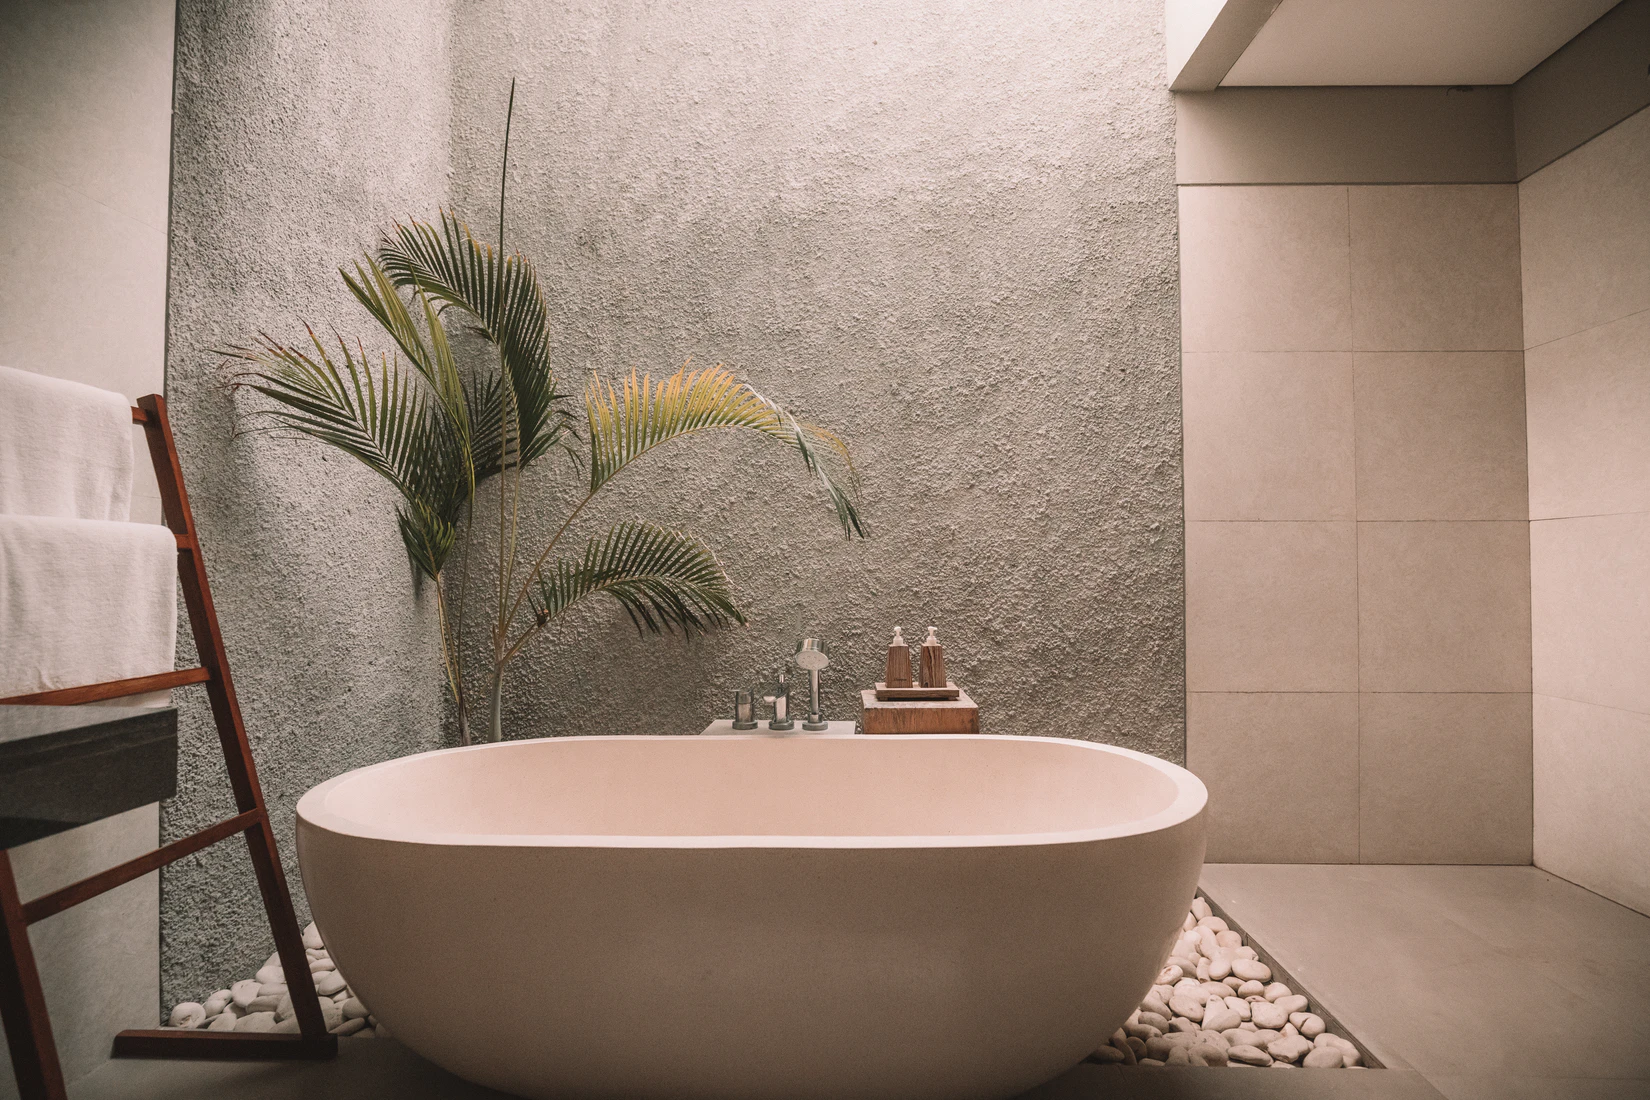 Tiled creme bathroom with a plant in the corner and a modern bathtub in the middle